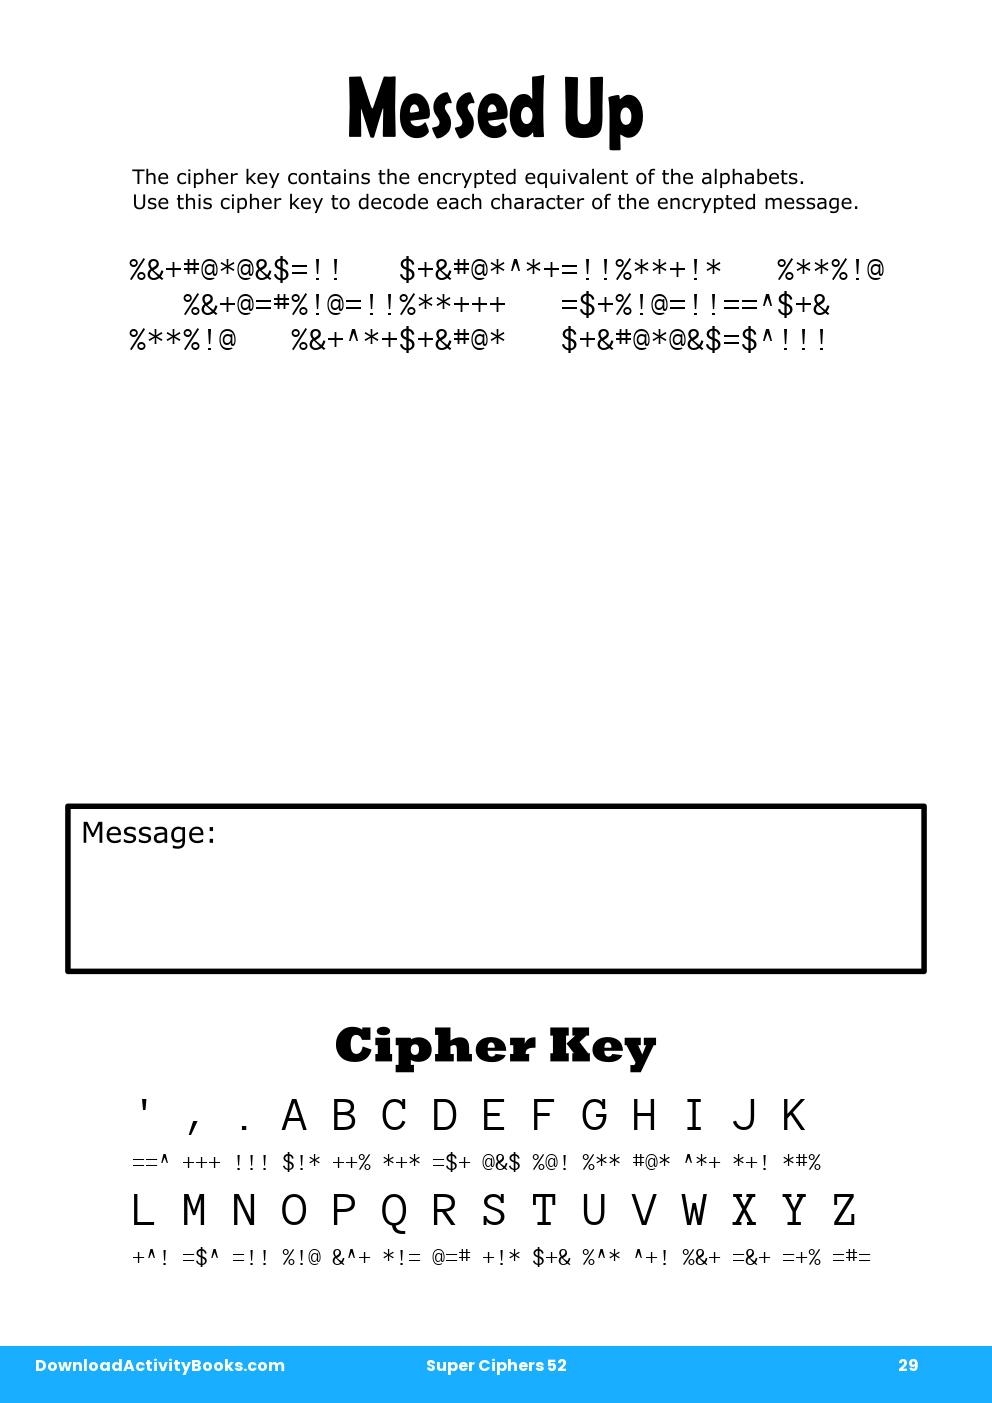 Messed Up in Super Ciphers 52